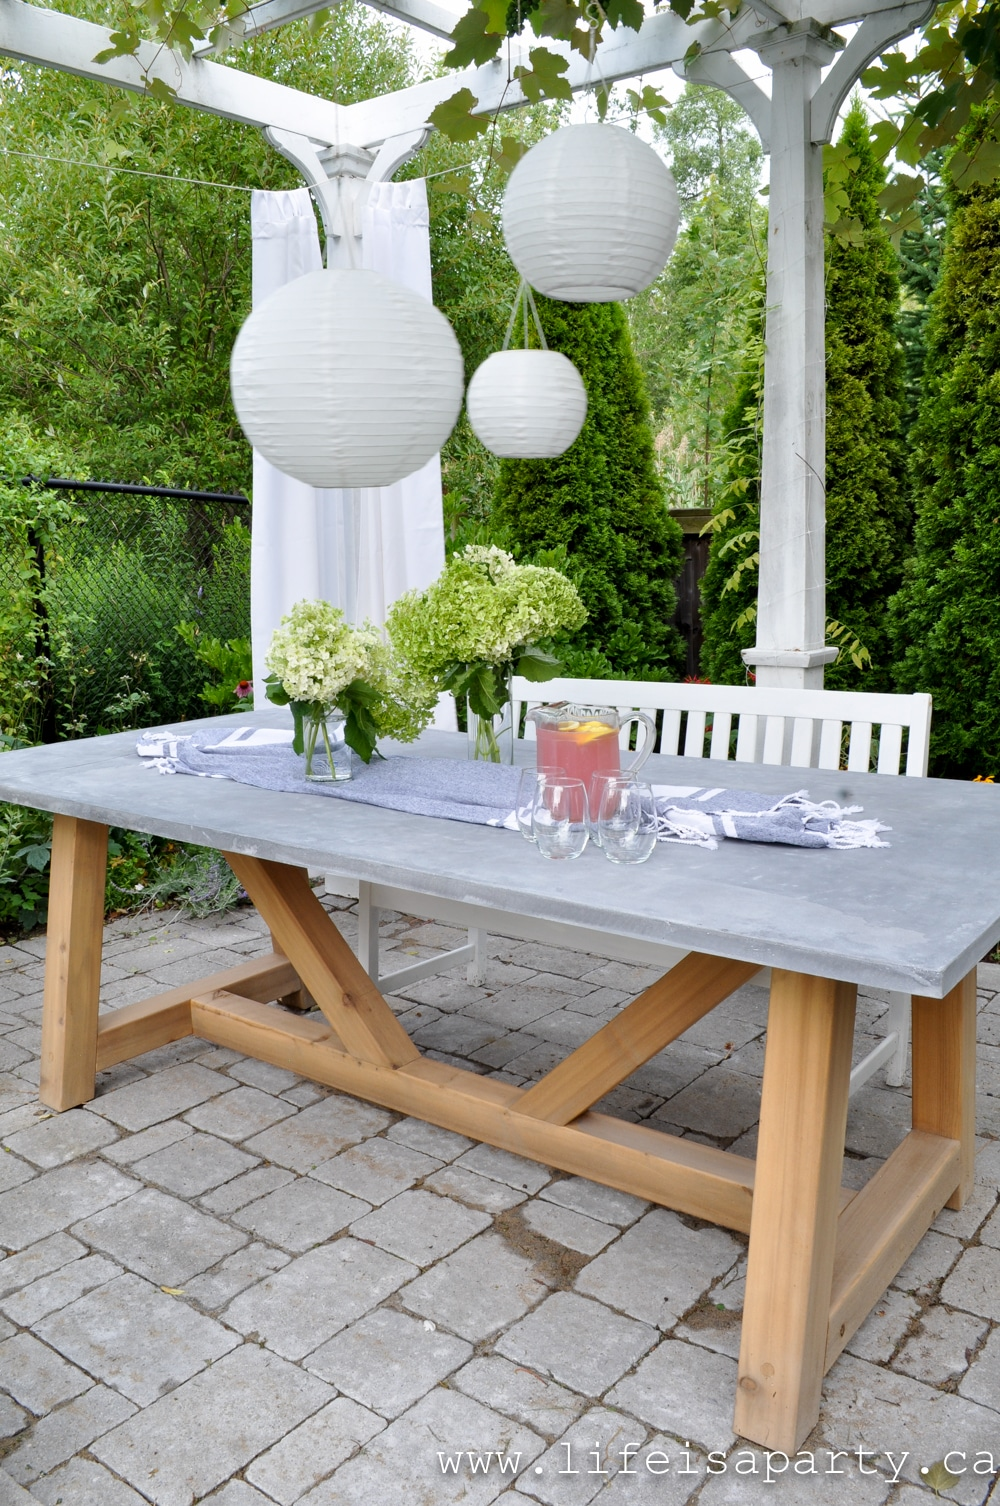 The Beauty of Patio Dining Tables: Enhancing Outdoor Dining Experiences